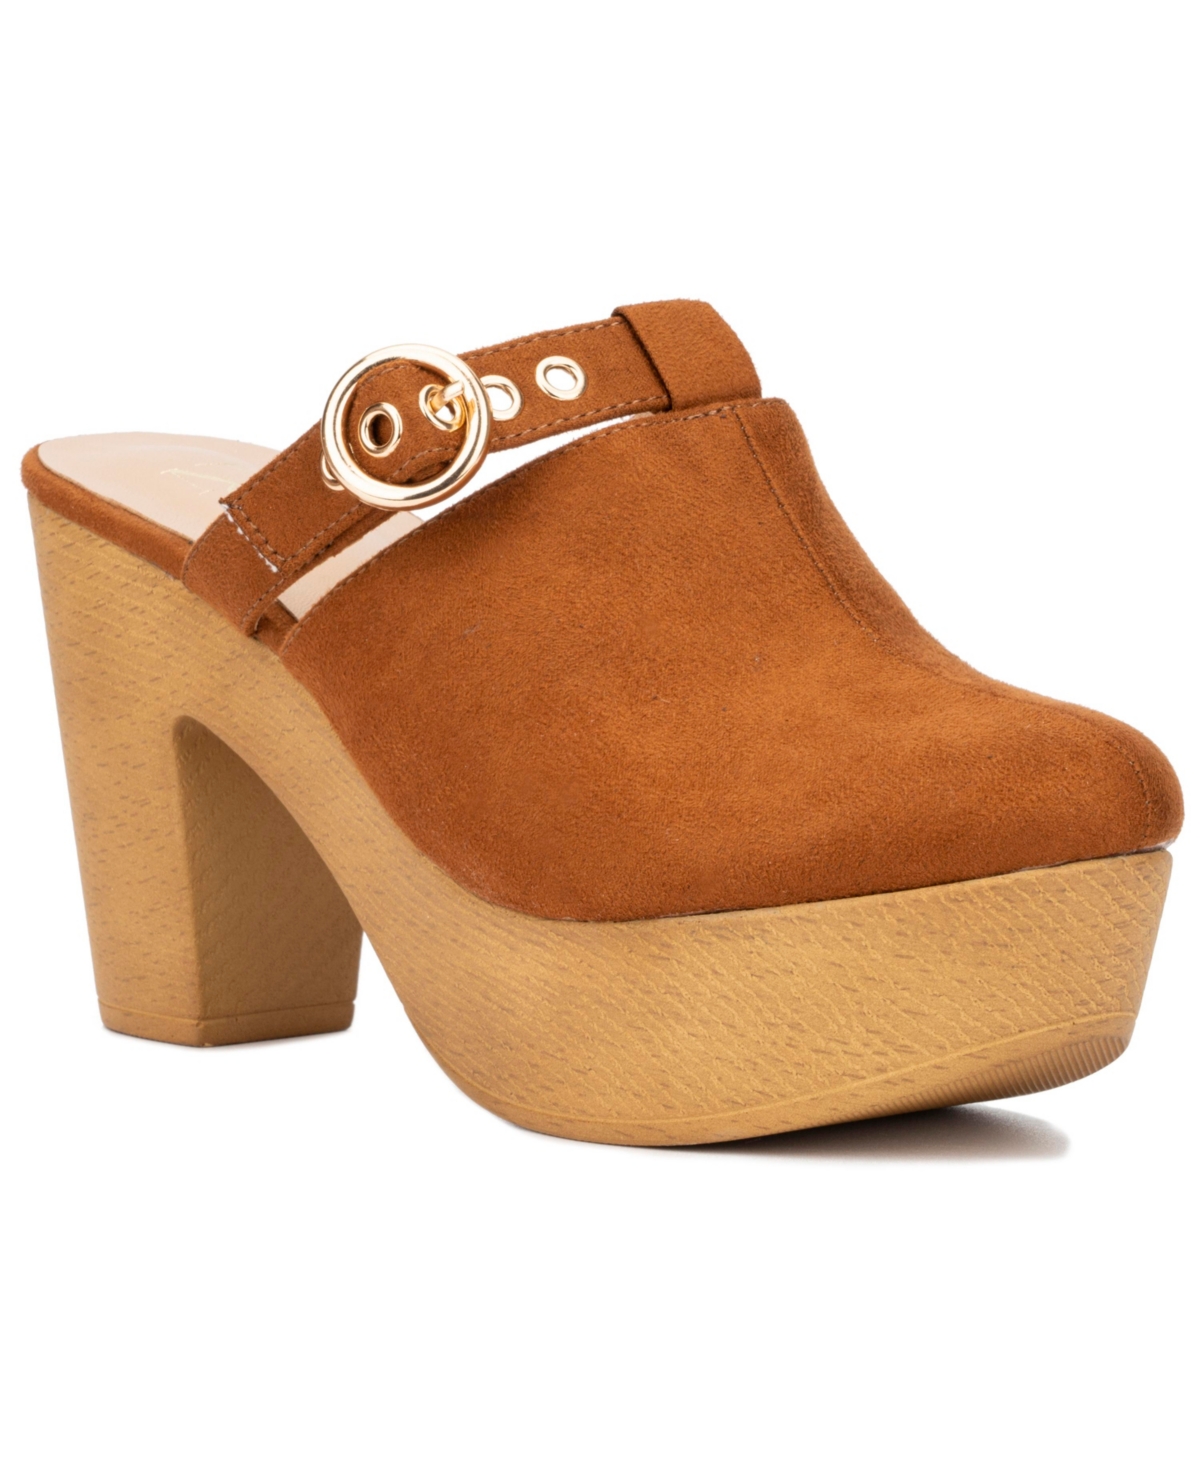 NEW YORK AND COMPANY WOMEN'S NYOMI CLOGS